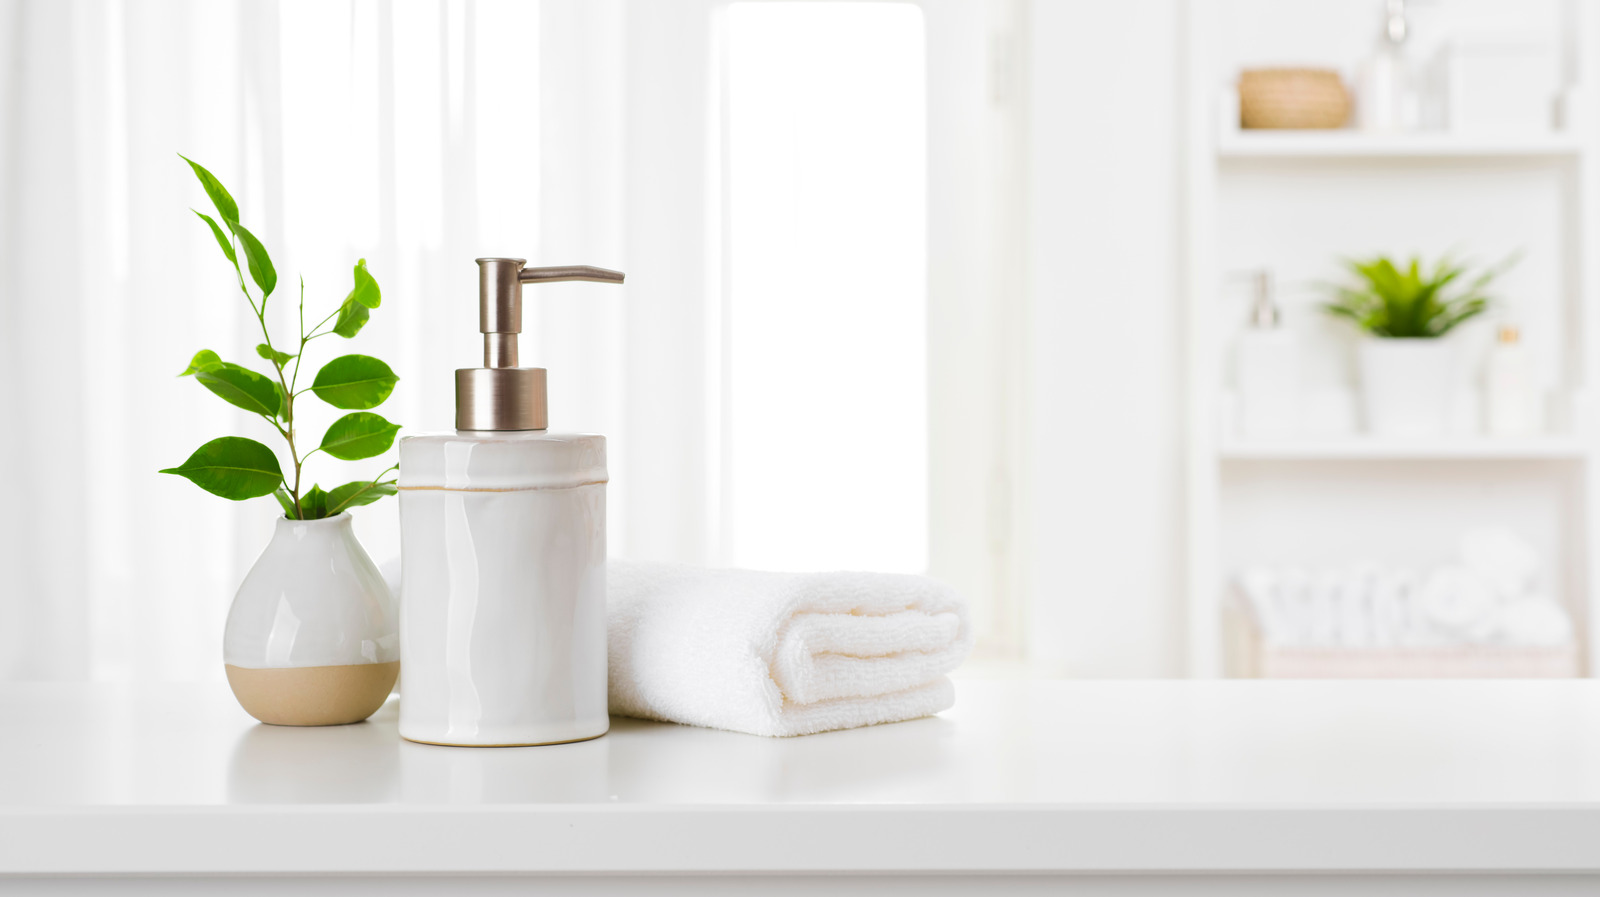 Bathroom Cleaning Supplies that Simplify Sanitation and Maintenance, Blog